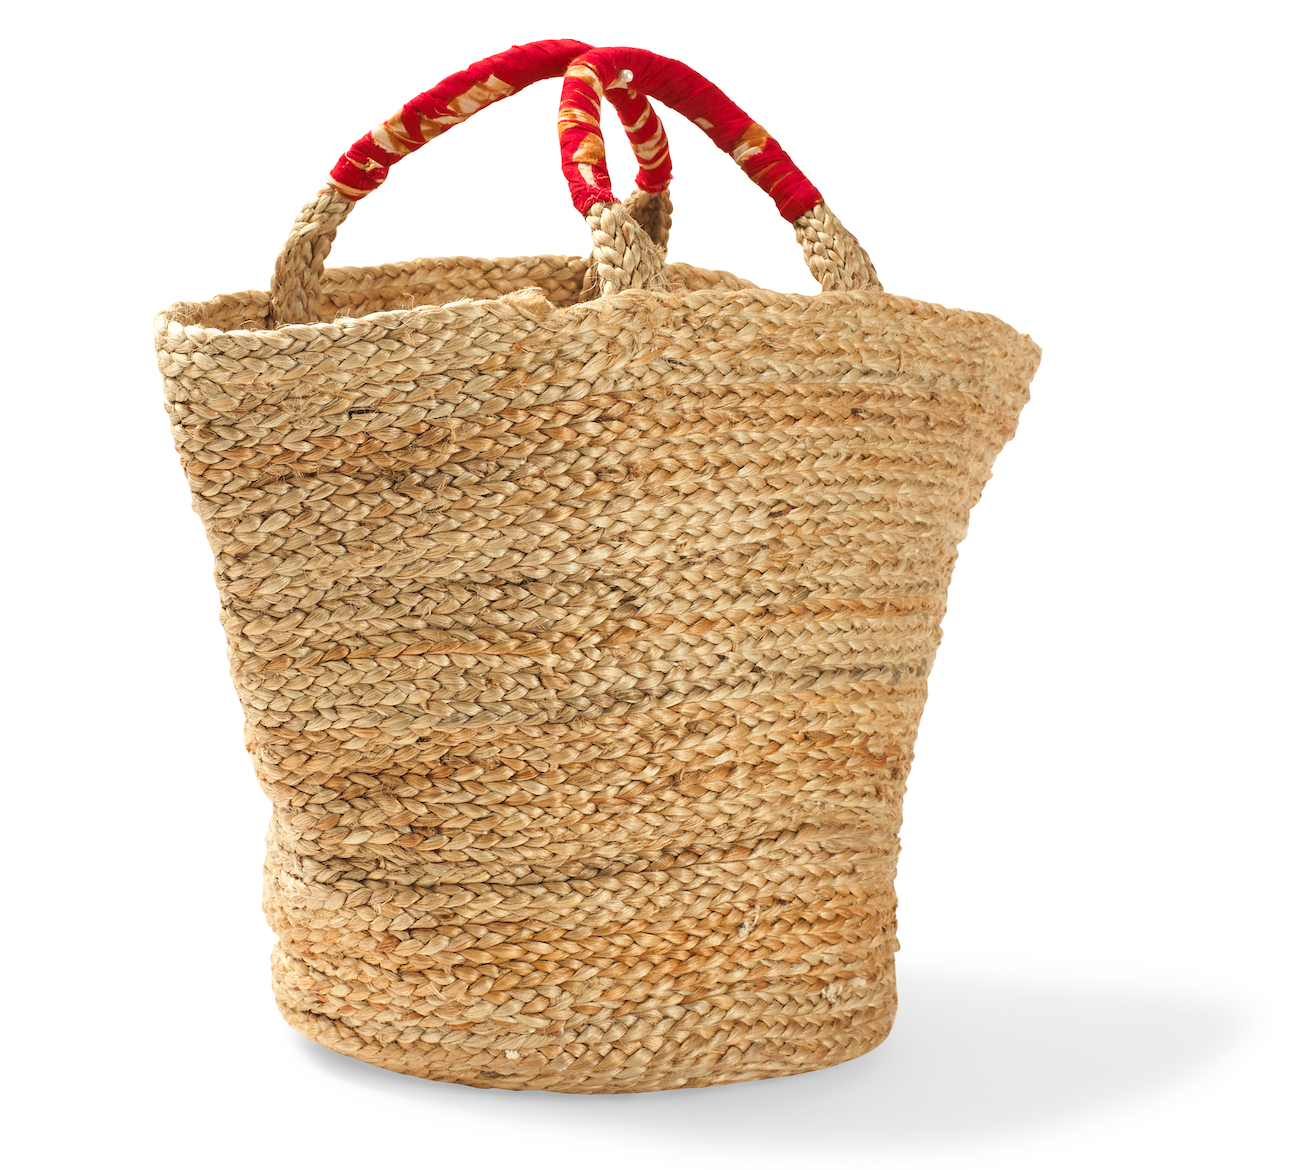 Large Woven Jute Basket with Red Handle